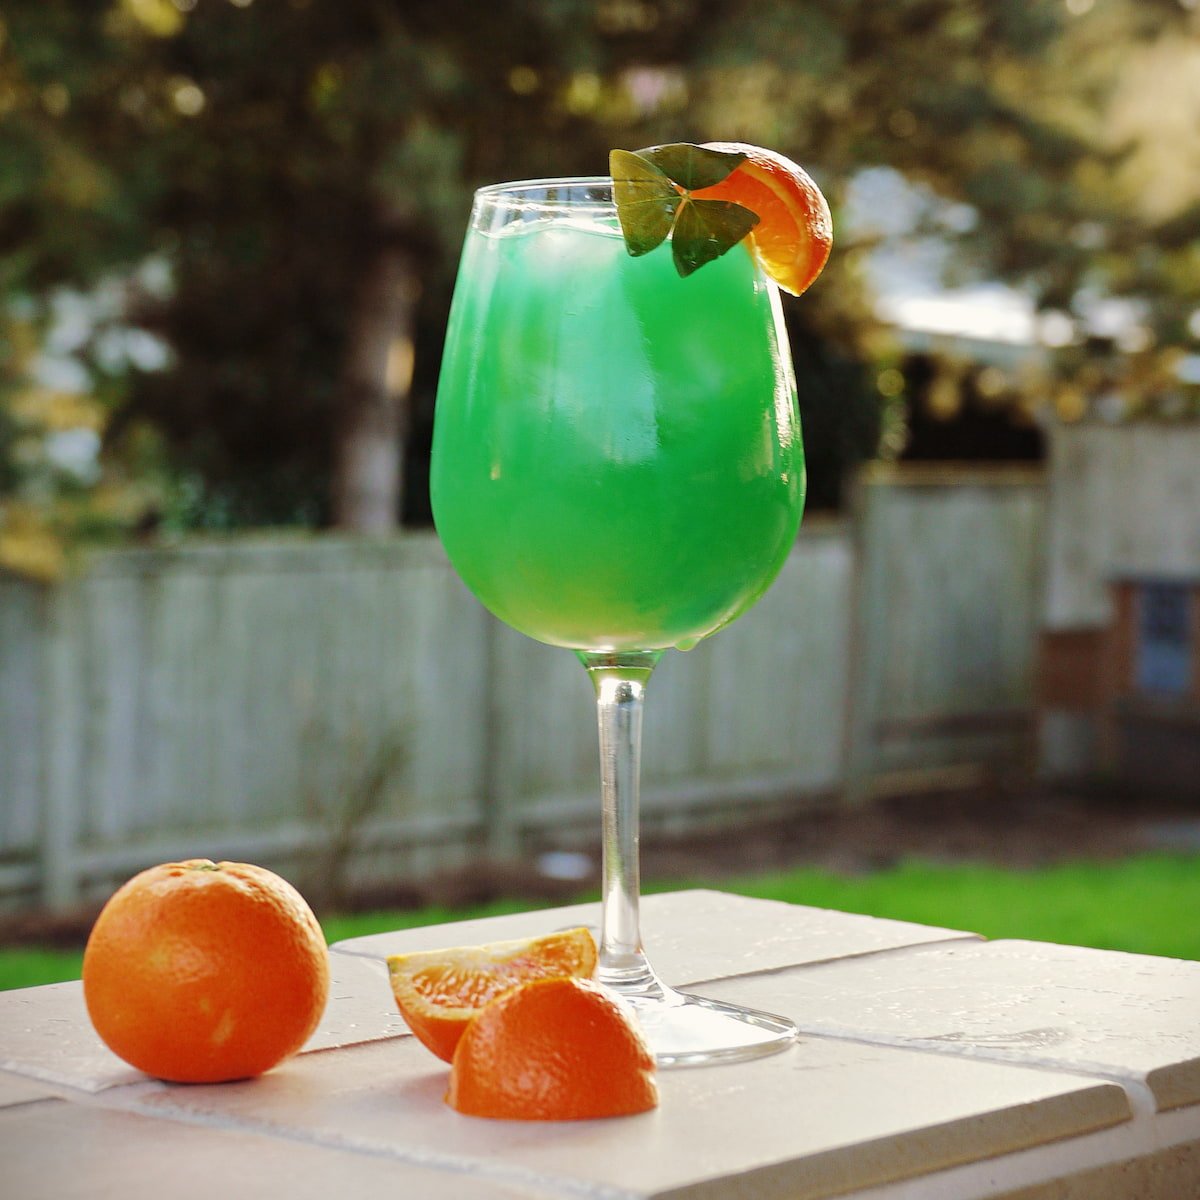 Green mixed drink in a wine glas, garnished with an orange slice and a shamrock.